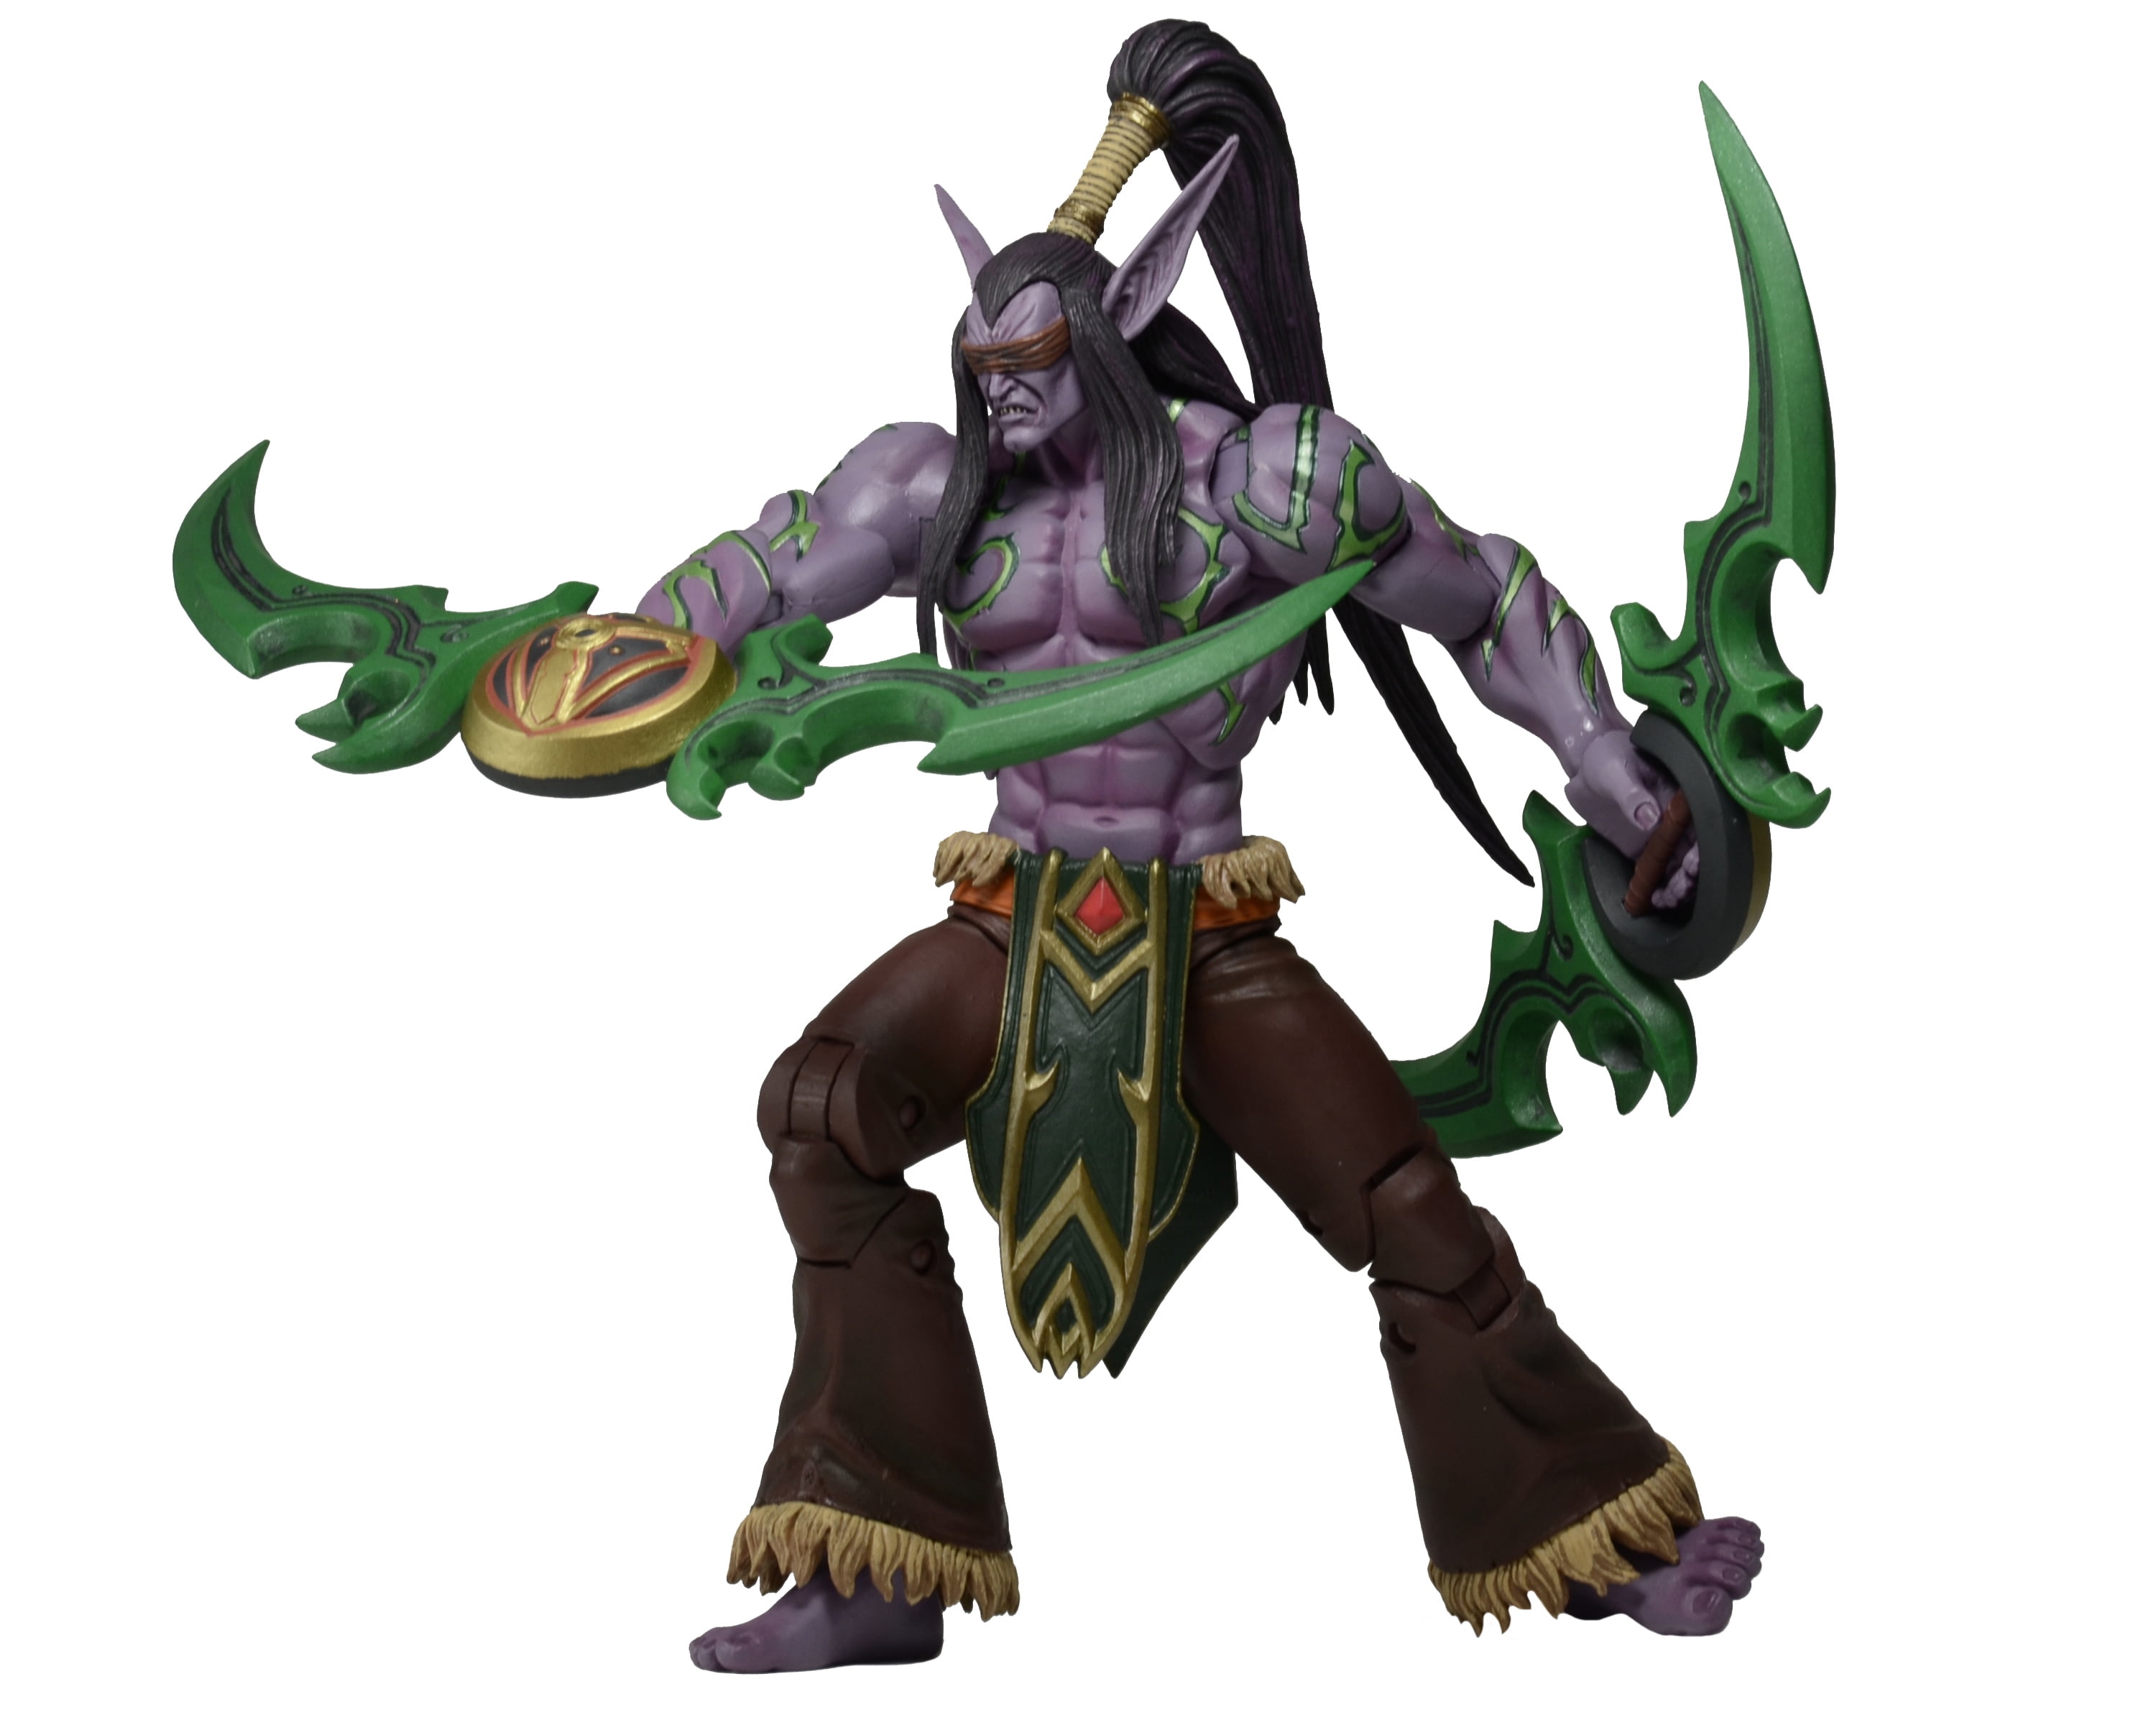 3D printed Illidan kit from WOW universe in M/L size worldwide Free Shipping 